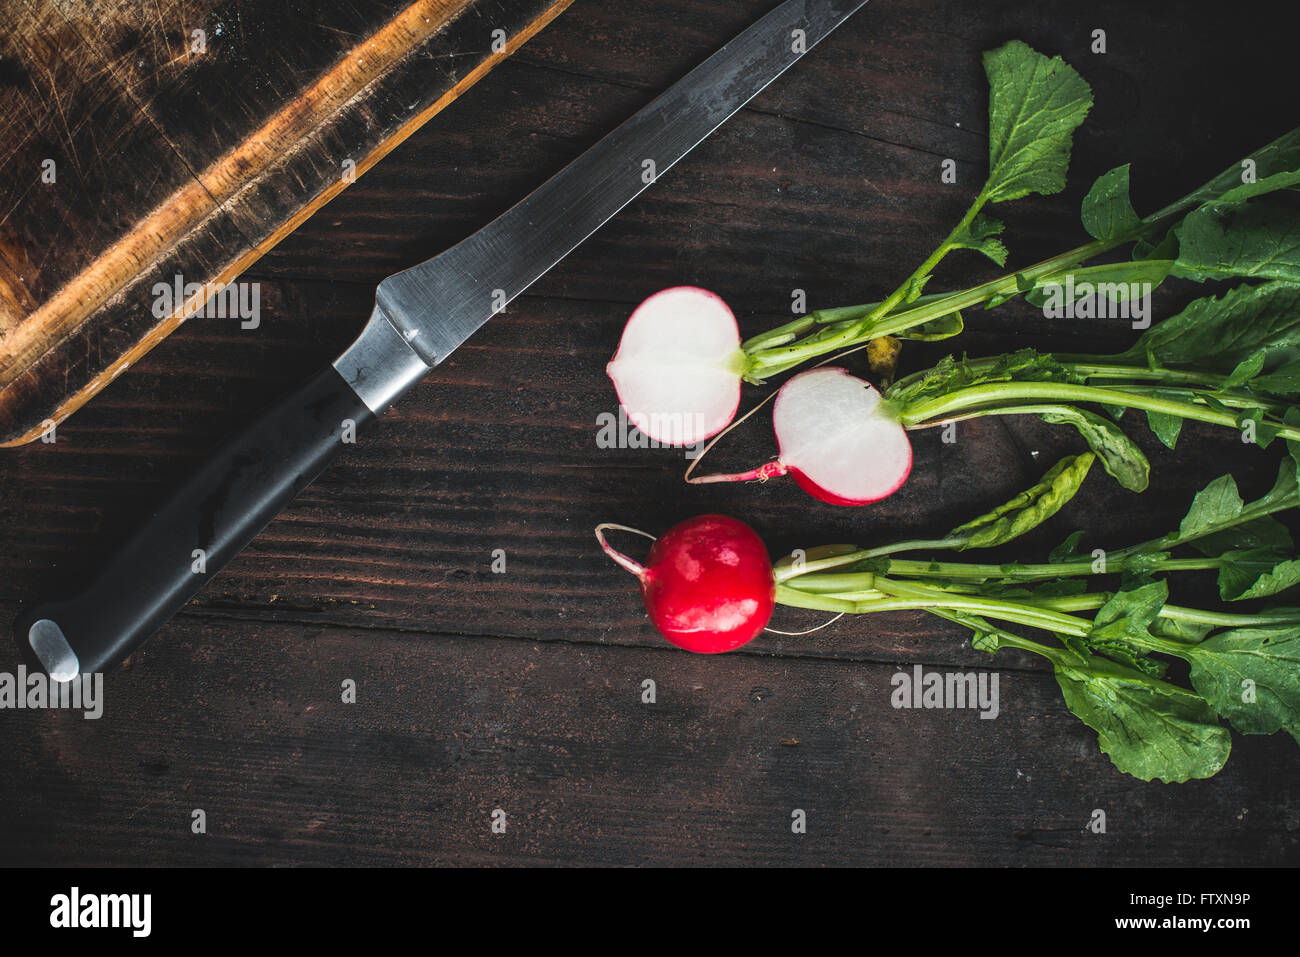 Radishes with a knife and chopping board on a wooden table Stock Photo